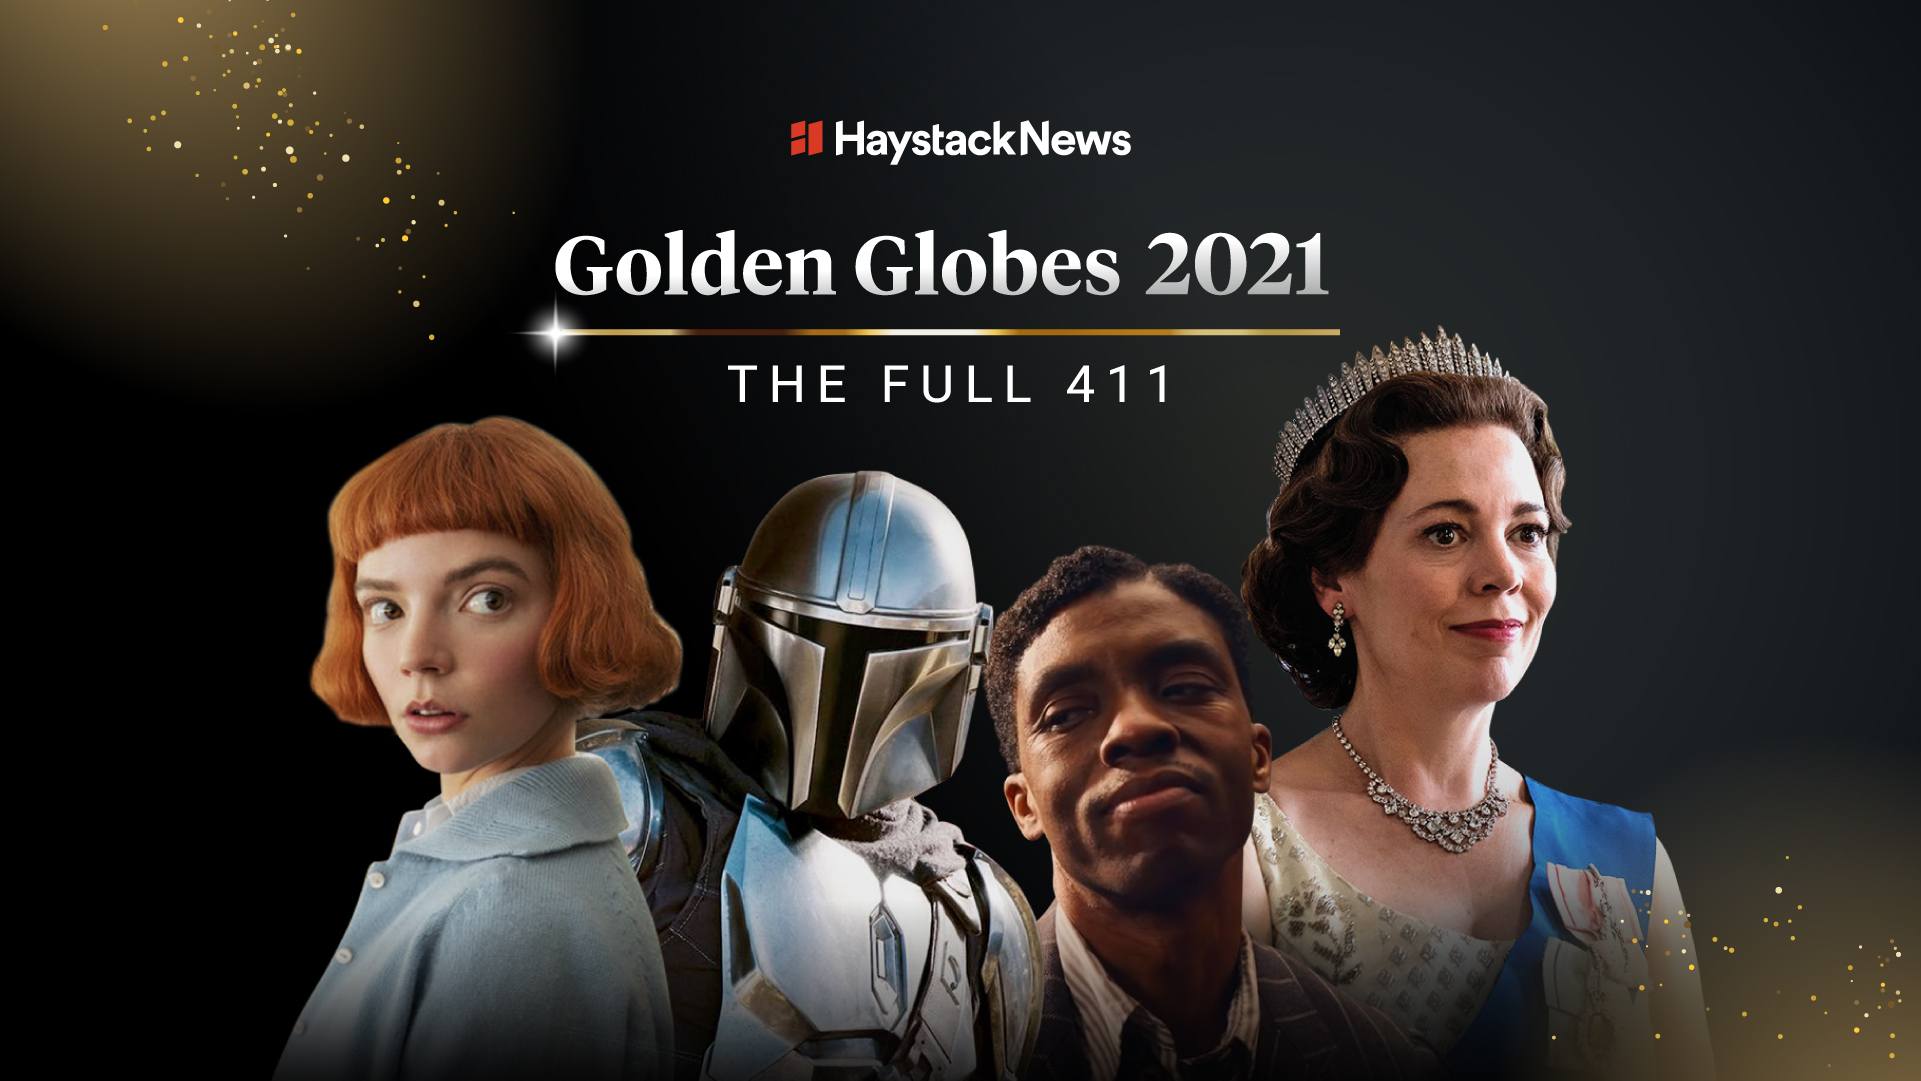 Haystack News Adds Dedicated Channels for Award Shows